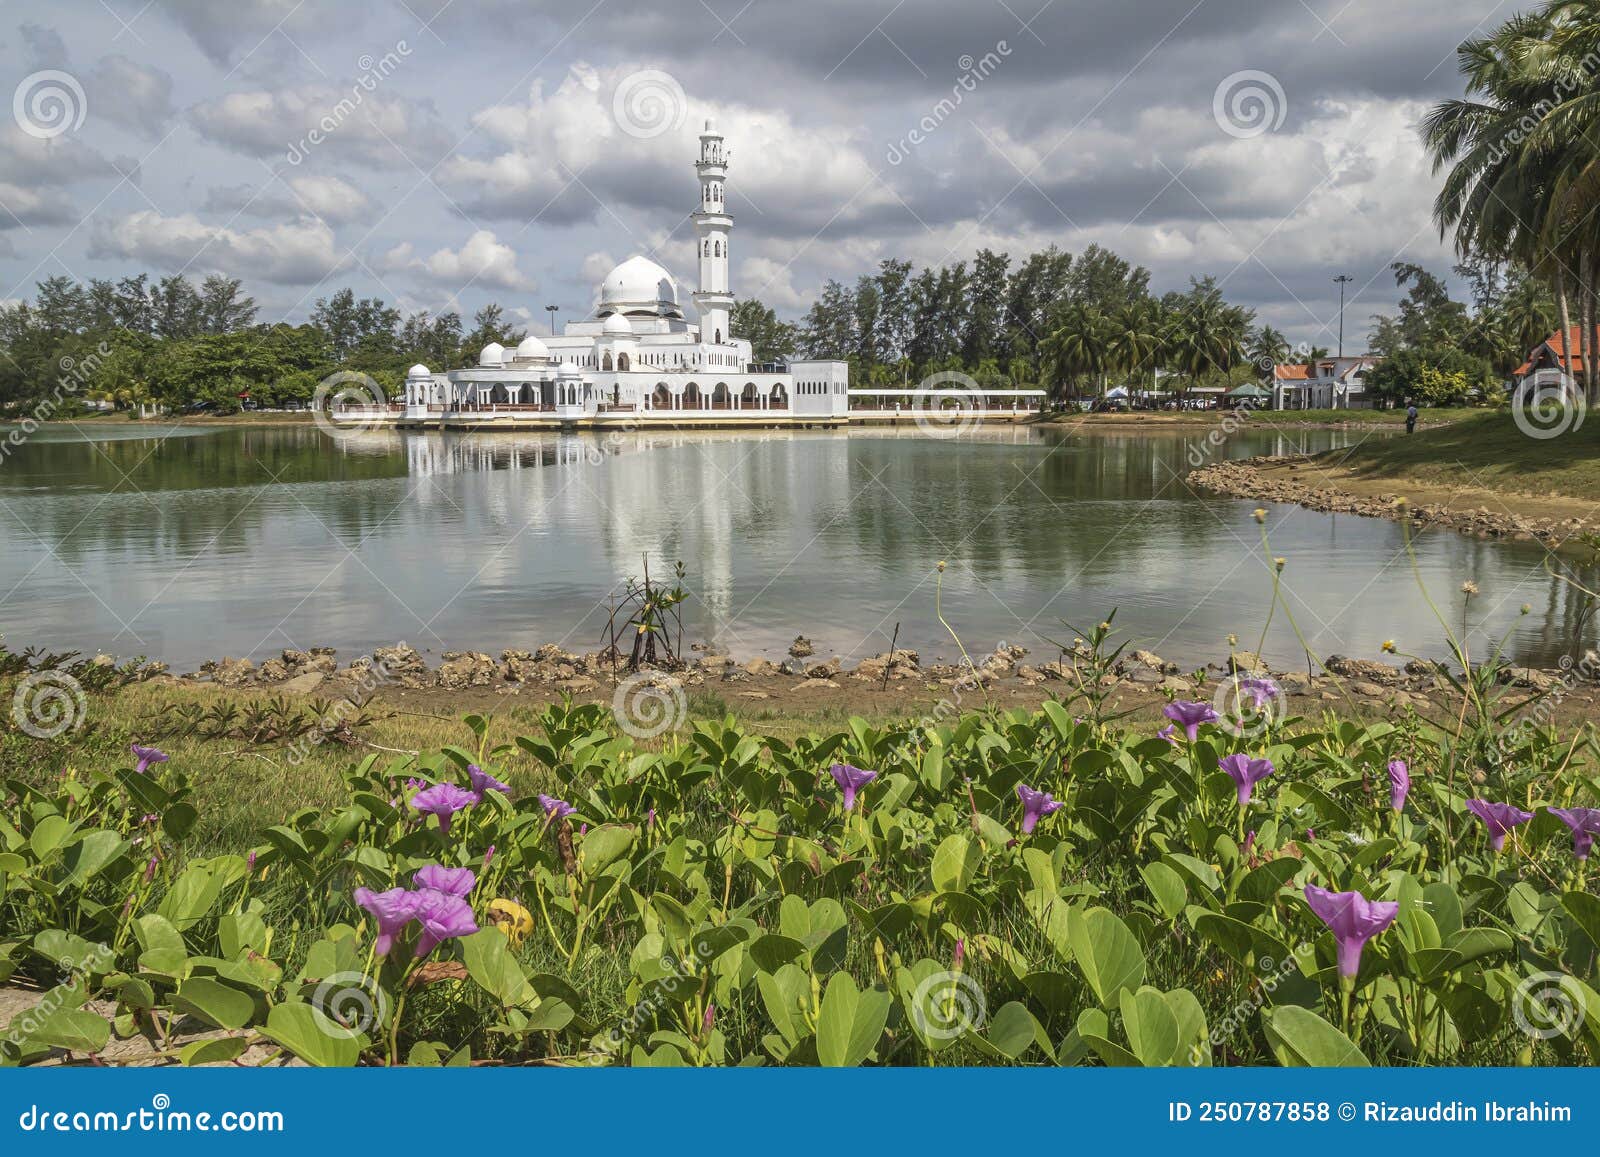 lake side flowering vegetation with kuala ibai floating mosque and its reflection in the background.